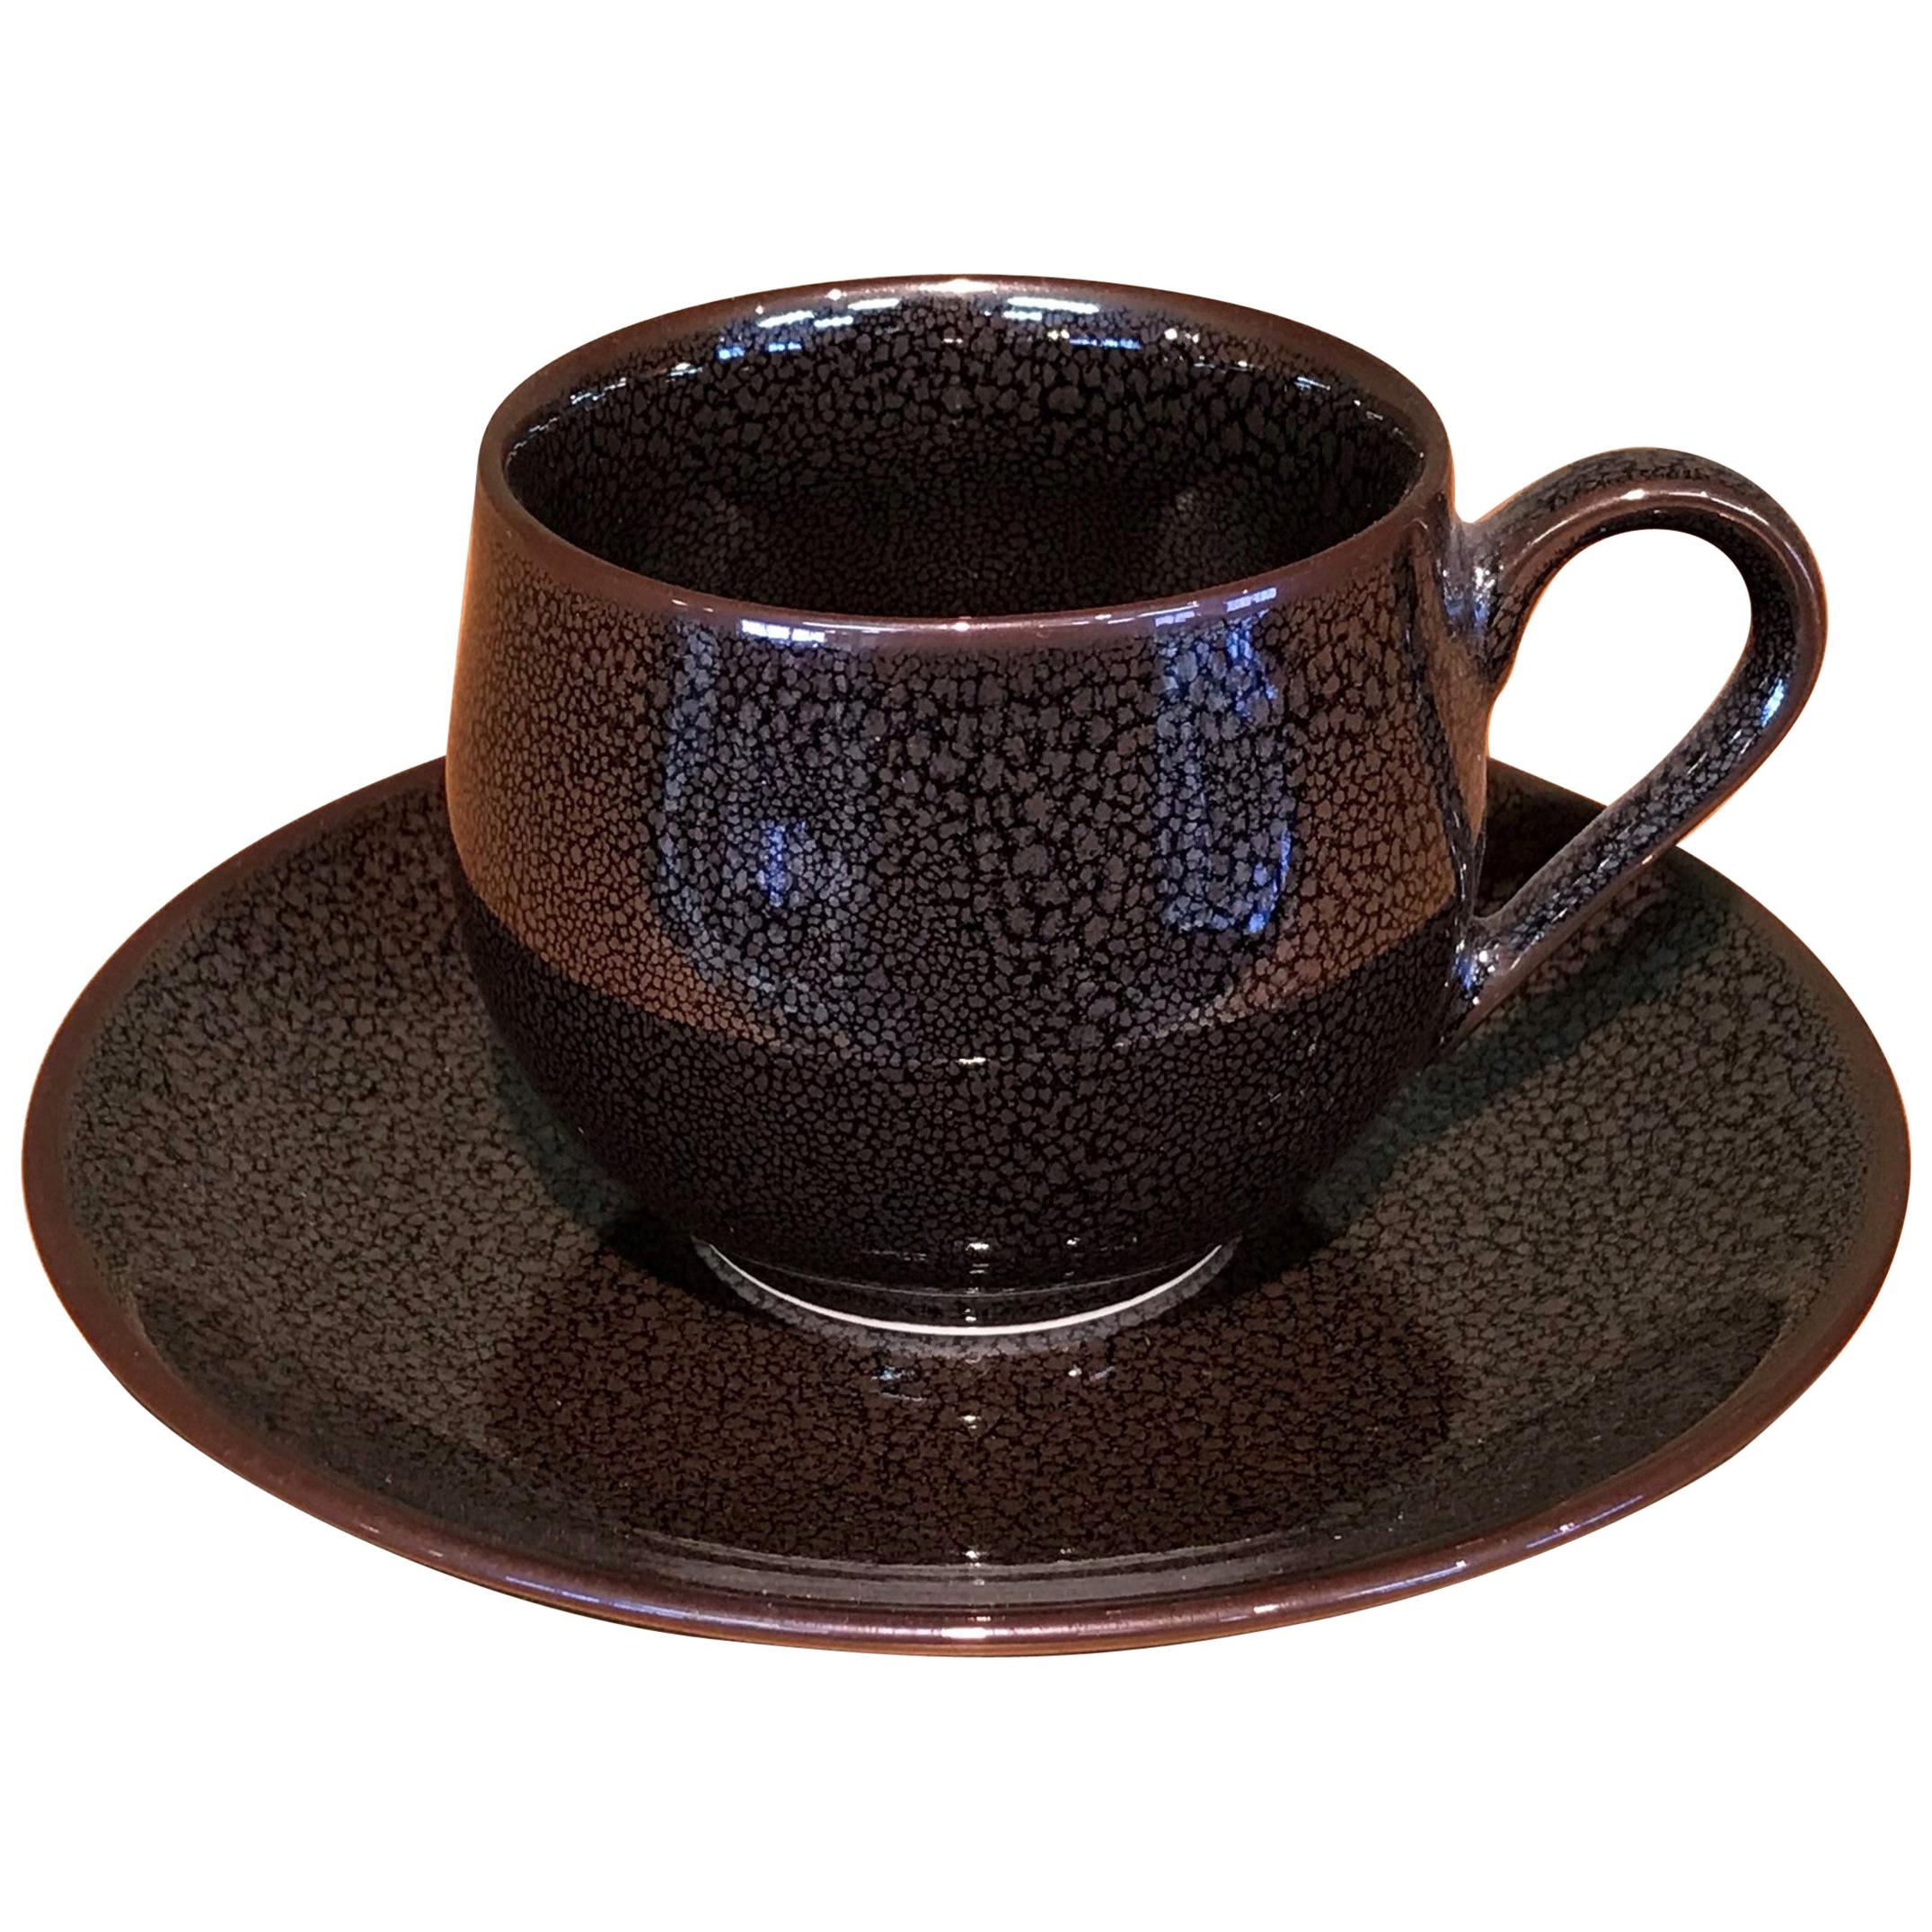 Japanese Hand-Glazed Brown Porcelain Cup & Saucer by Contemporary Master Artist